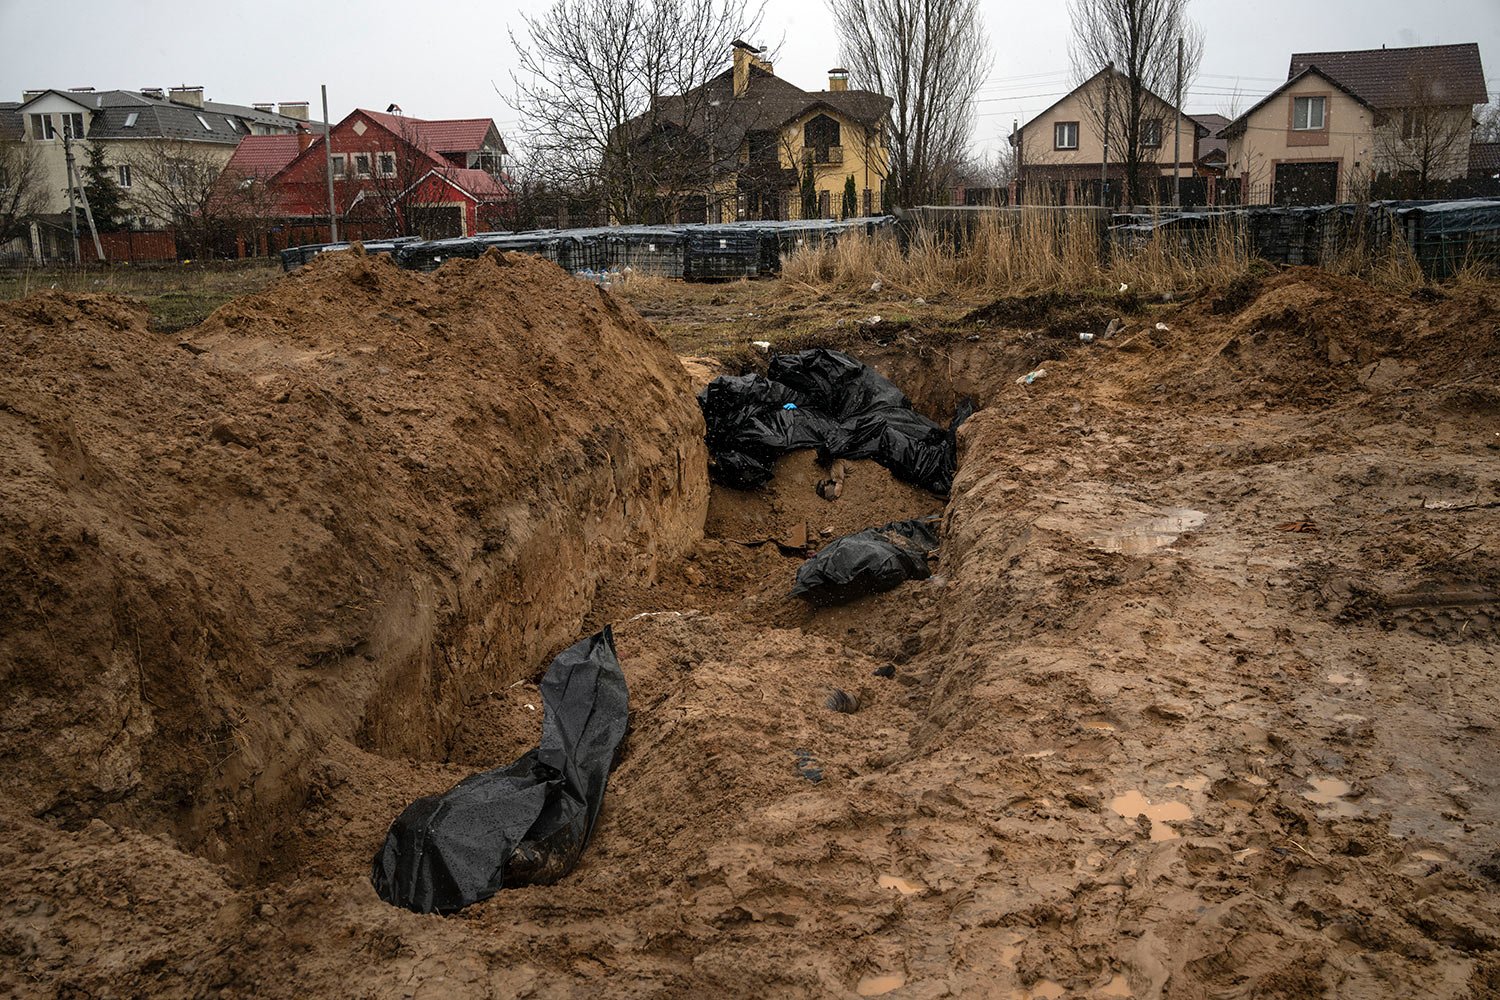  Bodies lie in a mass grave in Bucha, on the outskirts of Kyiv, Ukraine, Sunday, April 3, 2022. Ukrainian troops are finding brutalized bodies and widespread destruction in the suburbs of Kyiv, sparking new calls for a war crimes investigation and sa